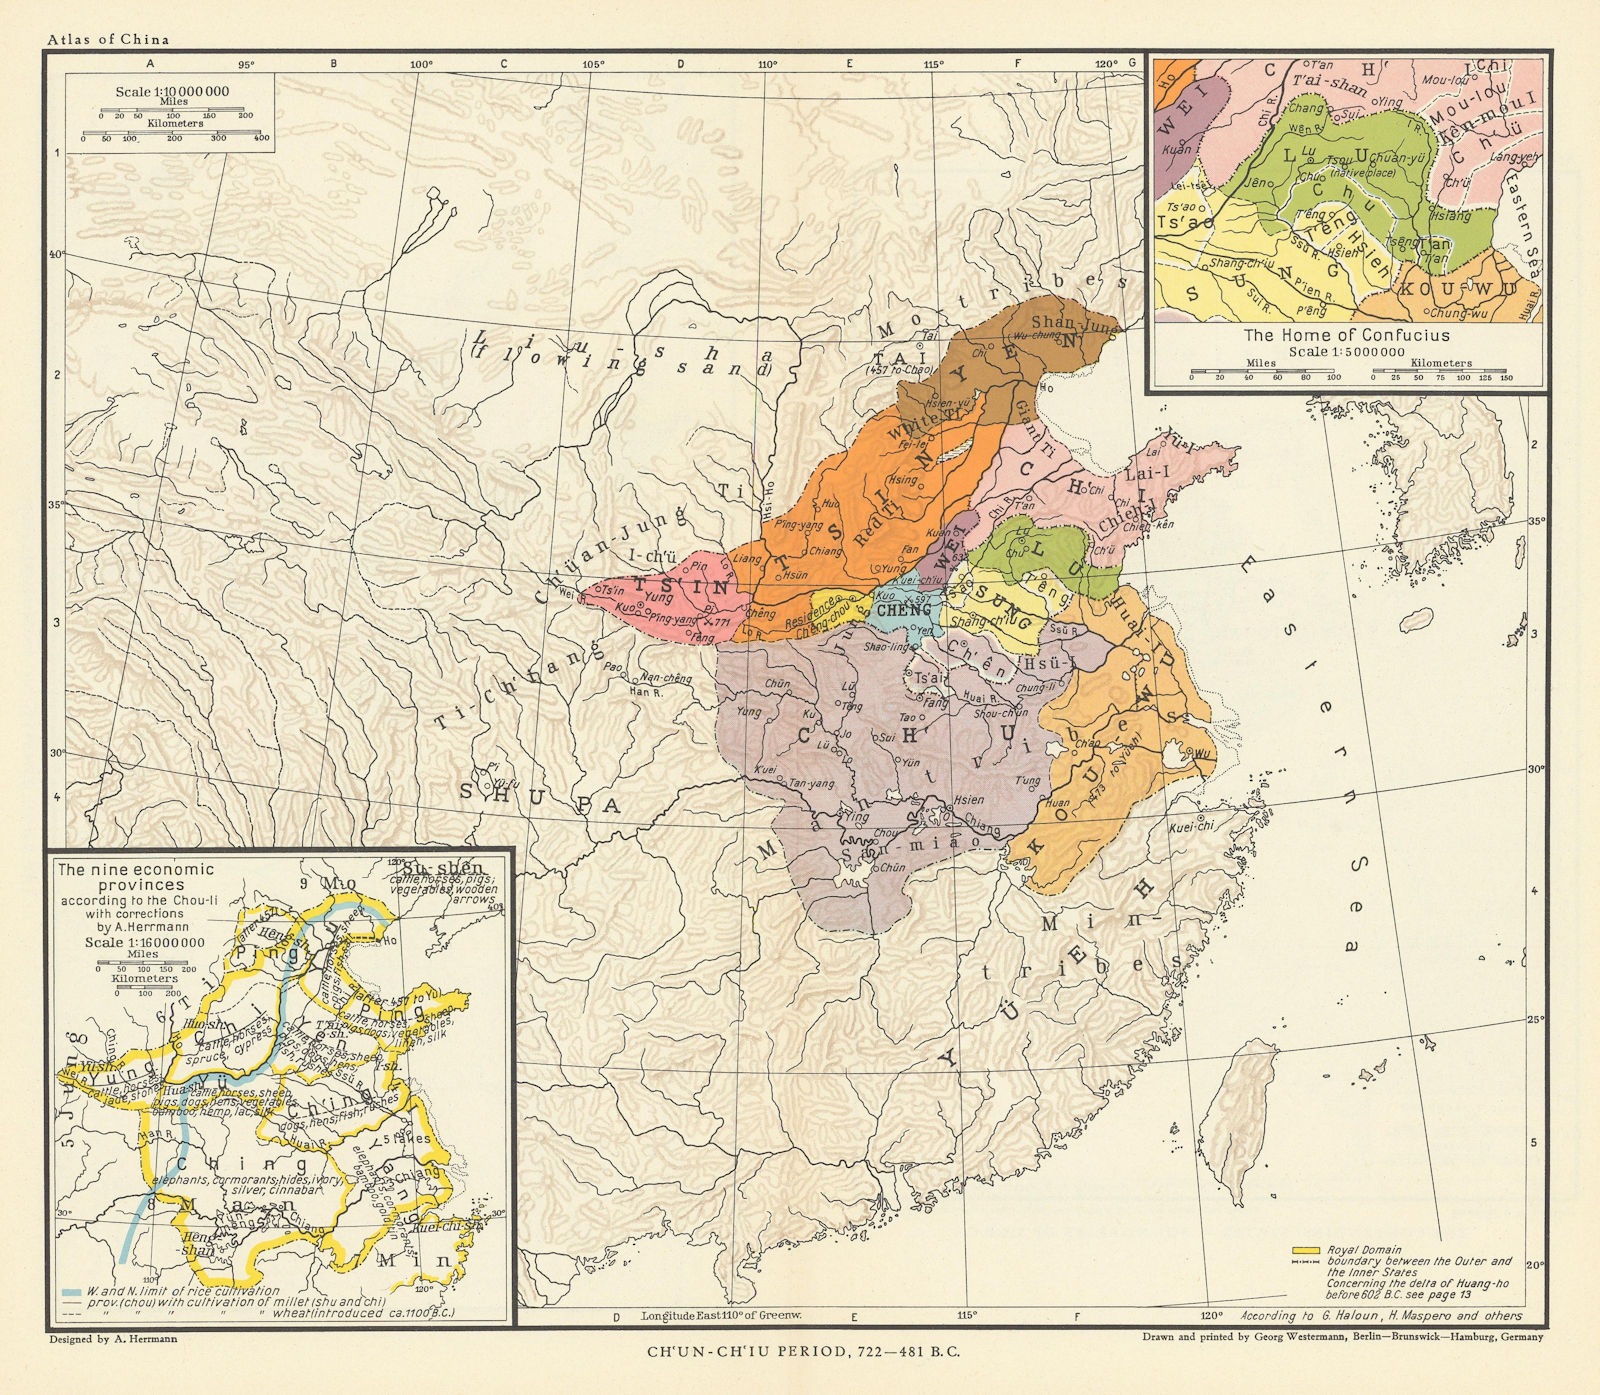 Associate Product China Spring & Autumn Period 722-481 BC. Confucius. 9 provinces 1935 old map